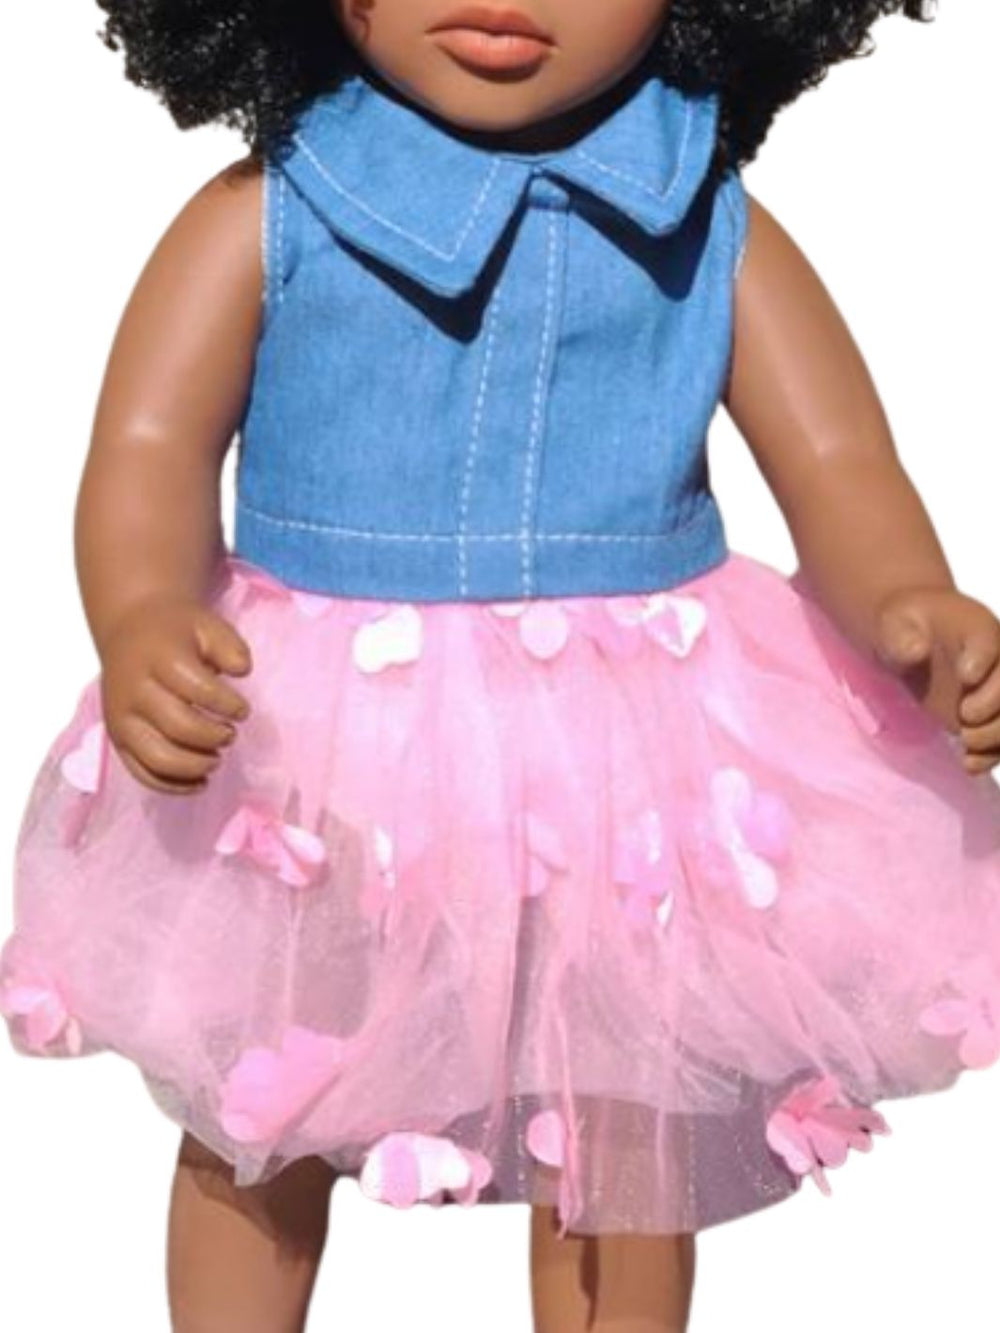 Pink Denim Tutu Dress & Bow - For 18" dolls: Outfit Only-Accessories-Beautiful Curly Me